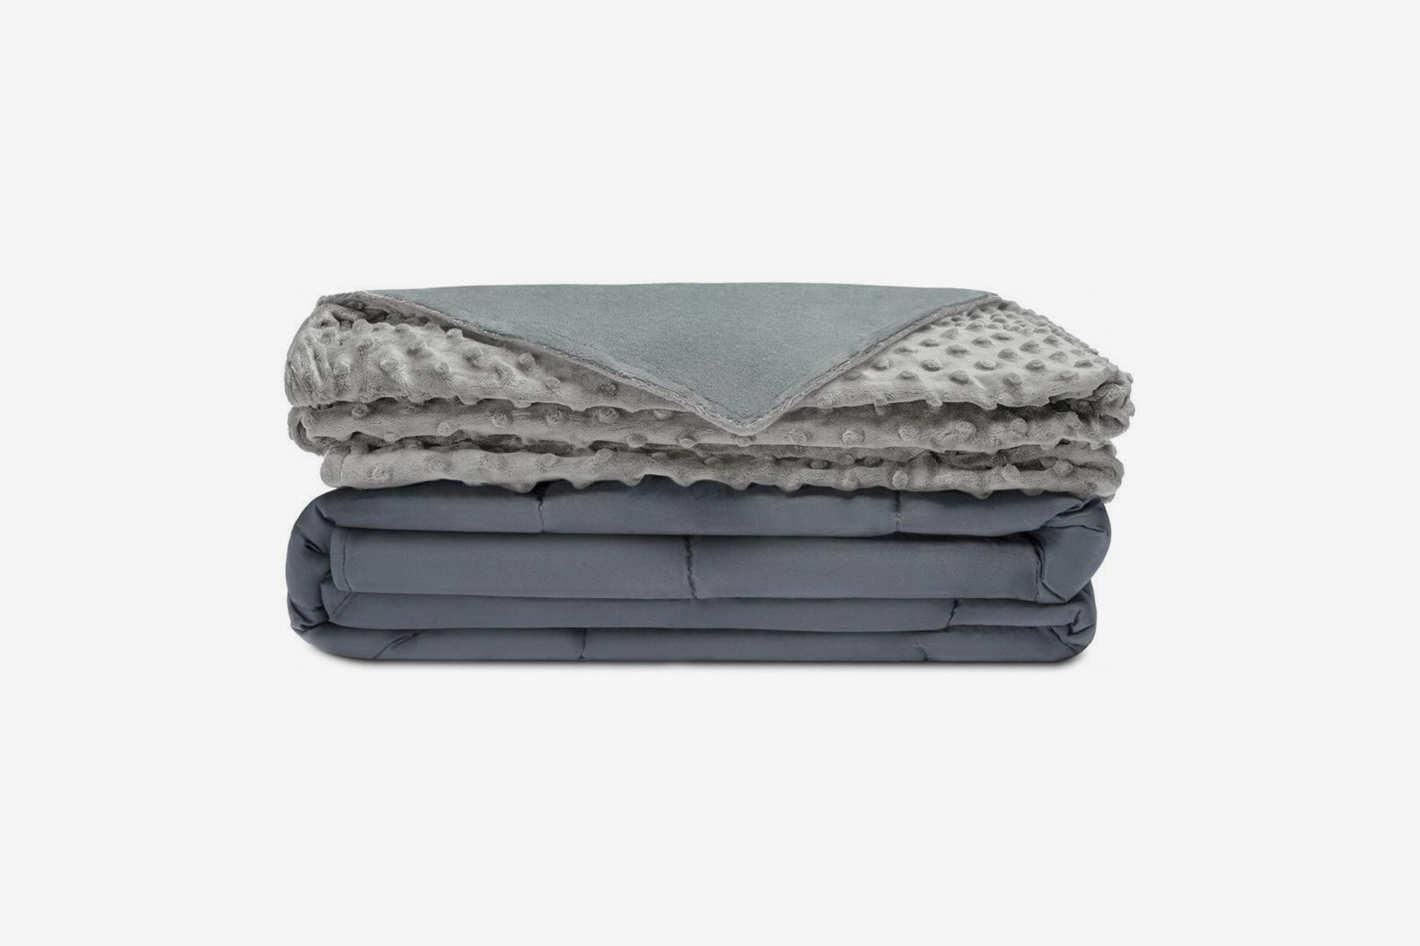 5 Therapeutic Benefits of Using a Hush Weighted Blanket - I See A Happy